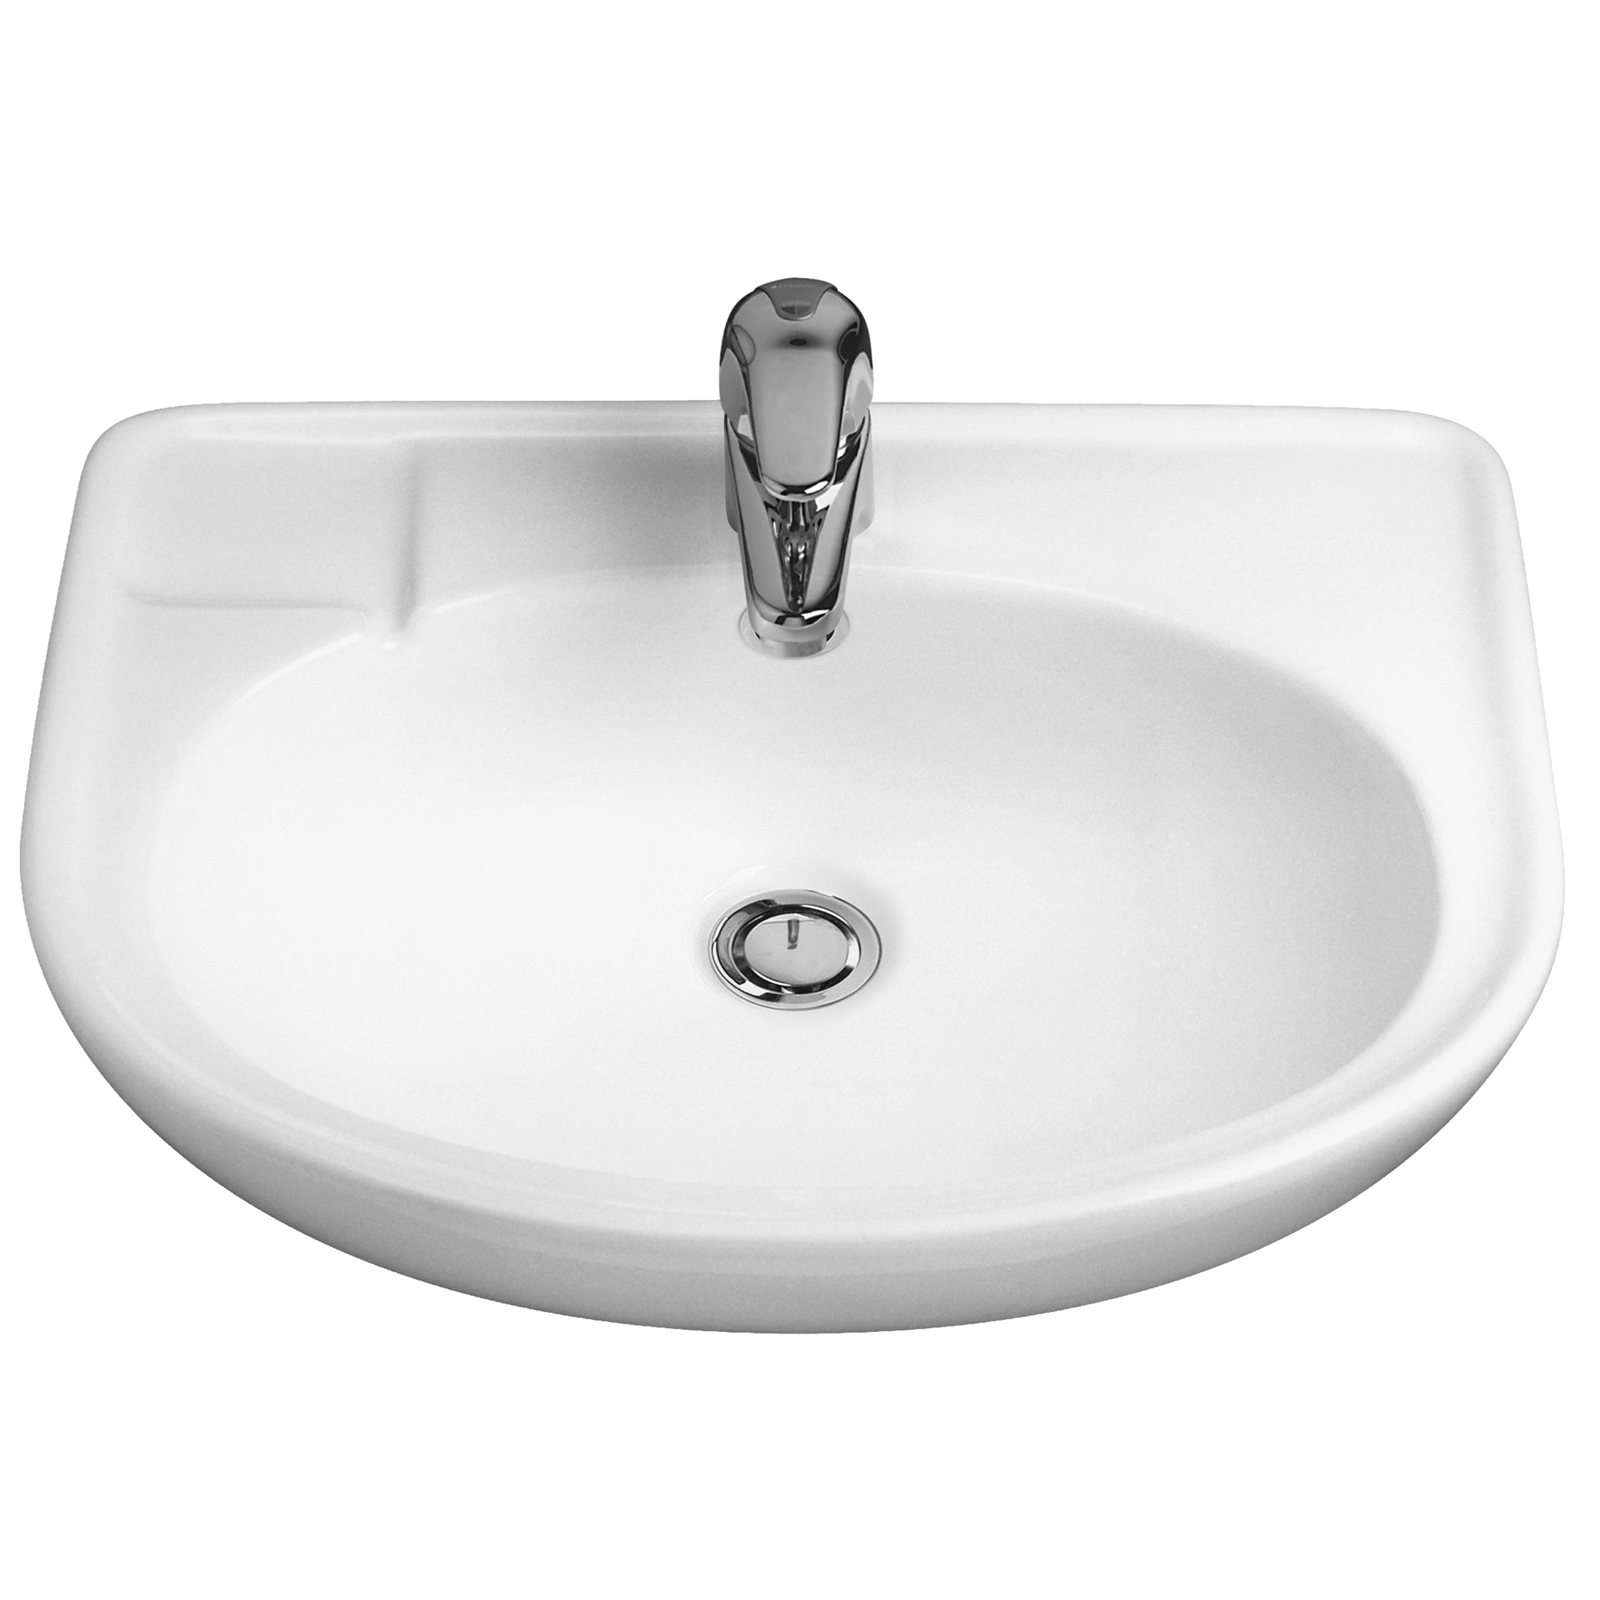 Caroma Laser Semi Recessed Basin with 3 Tap Holes